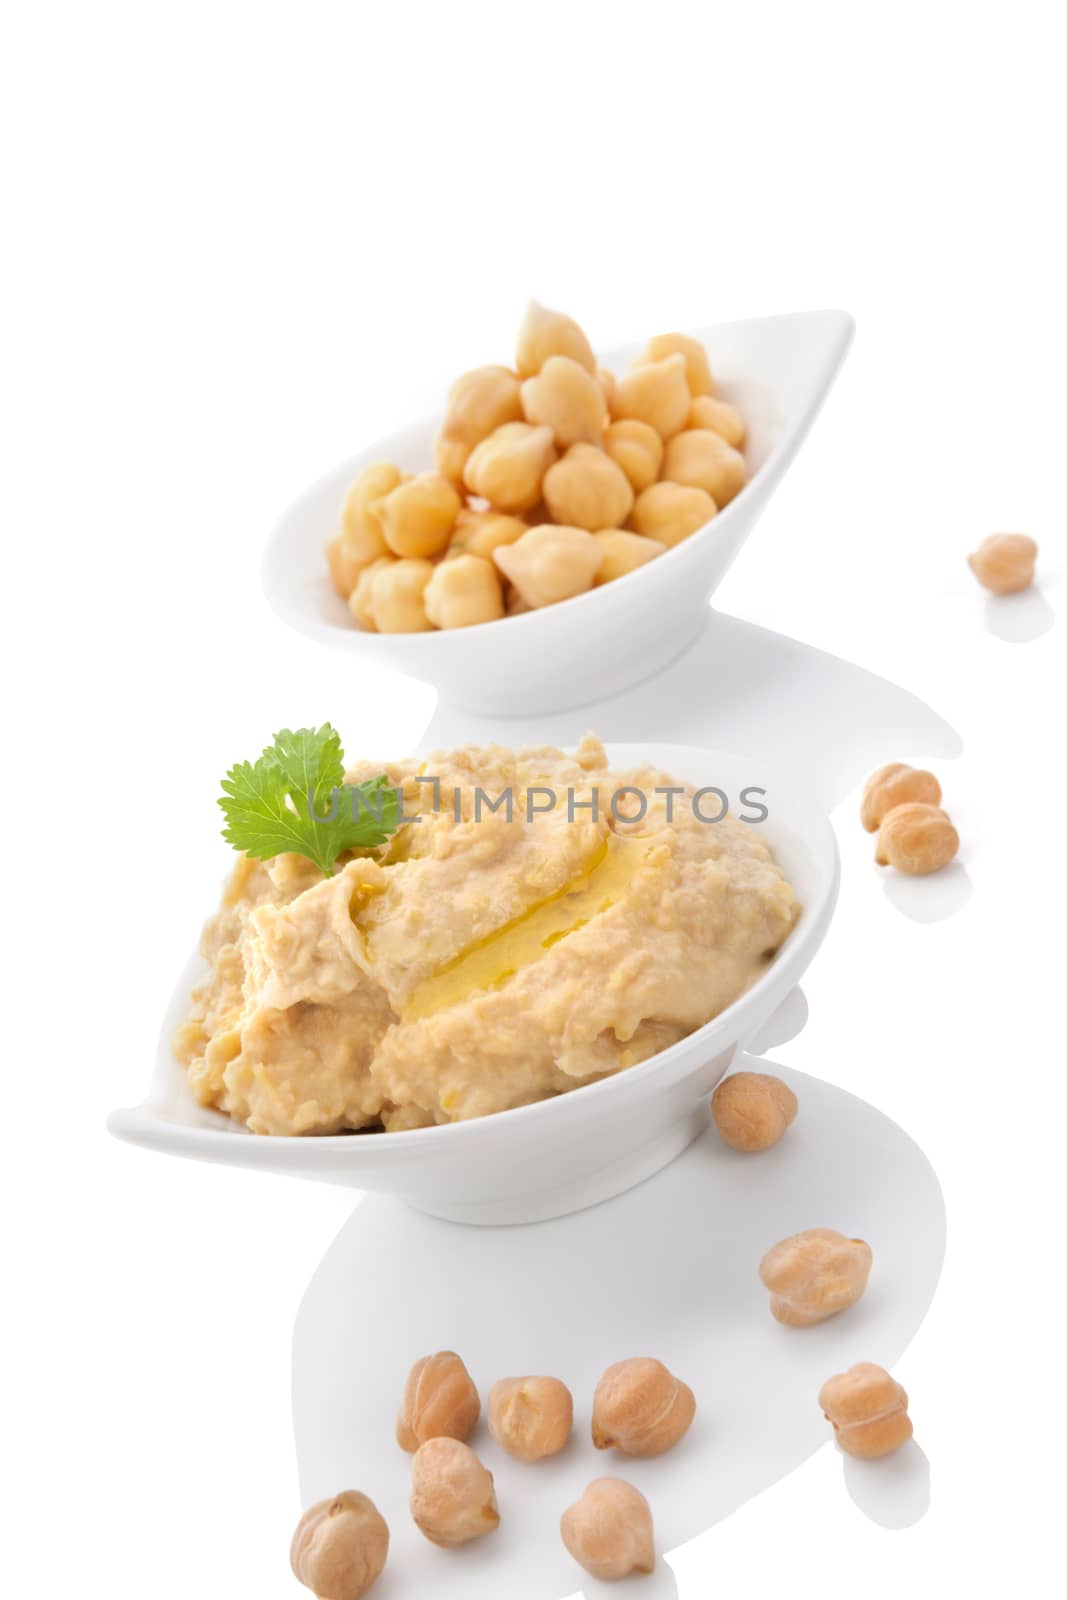 Chickpeas and hummus. by eskymaks